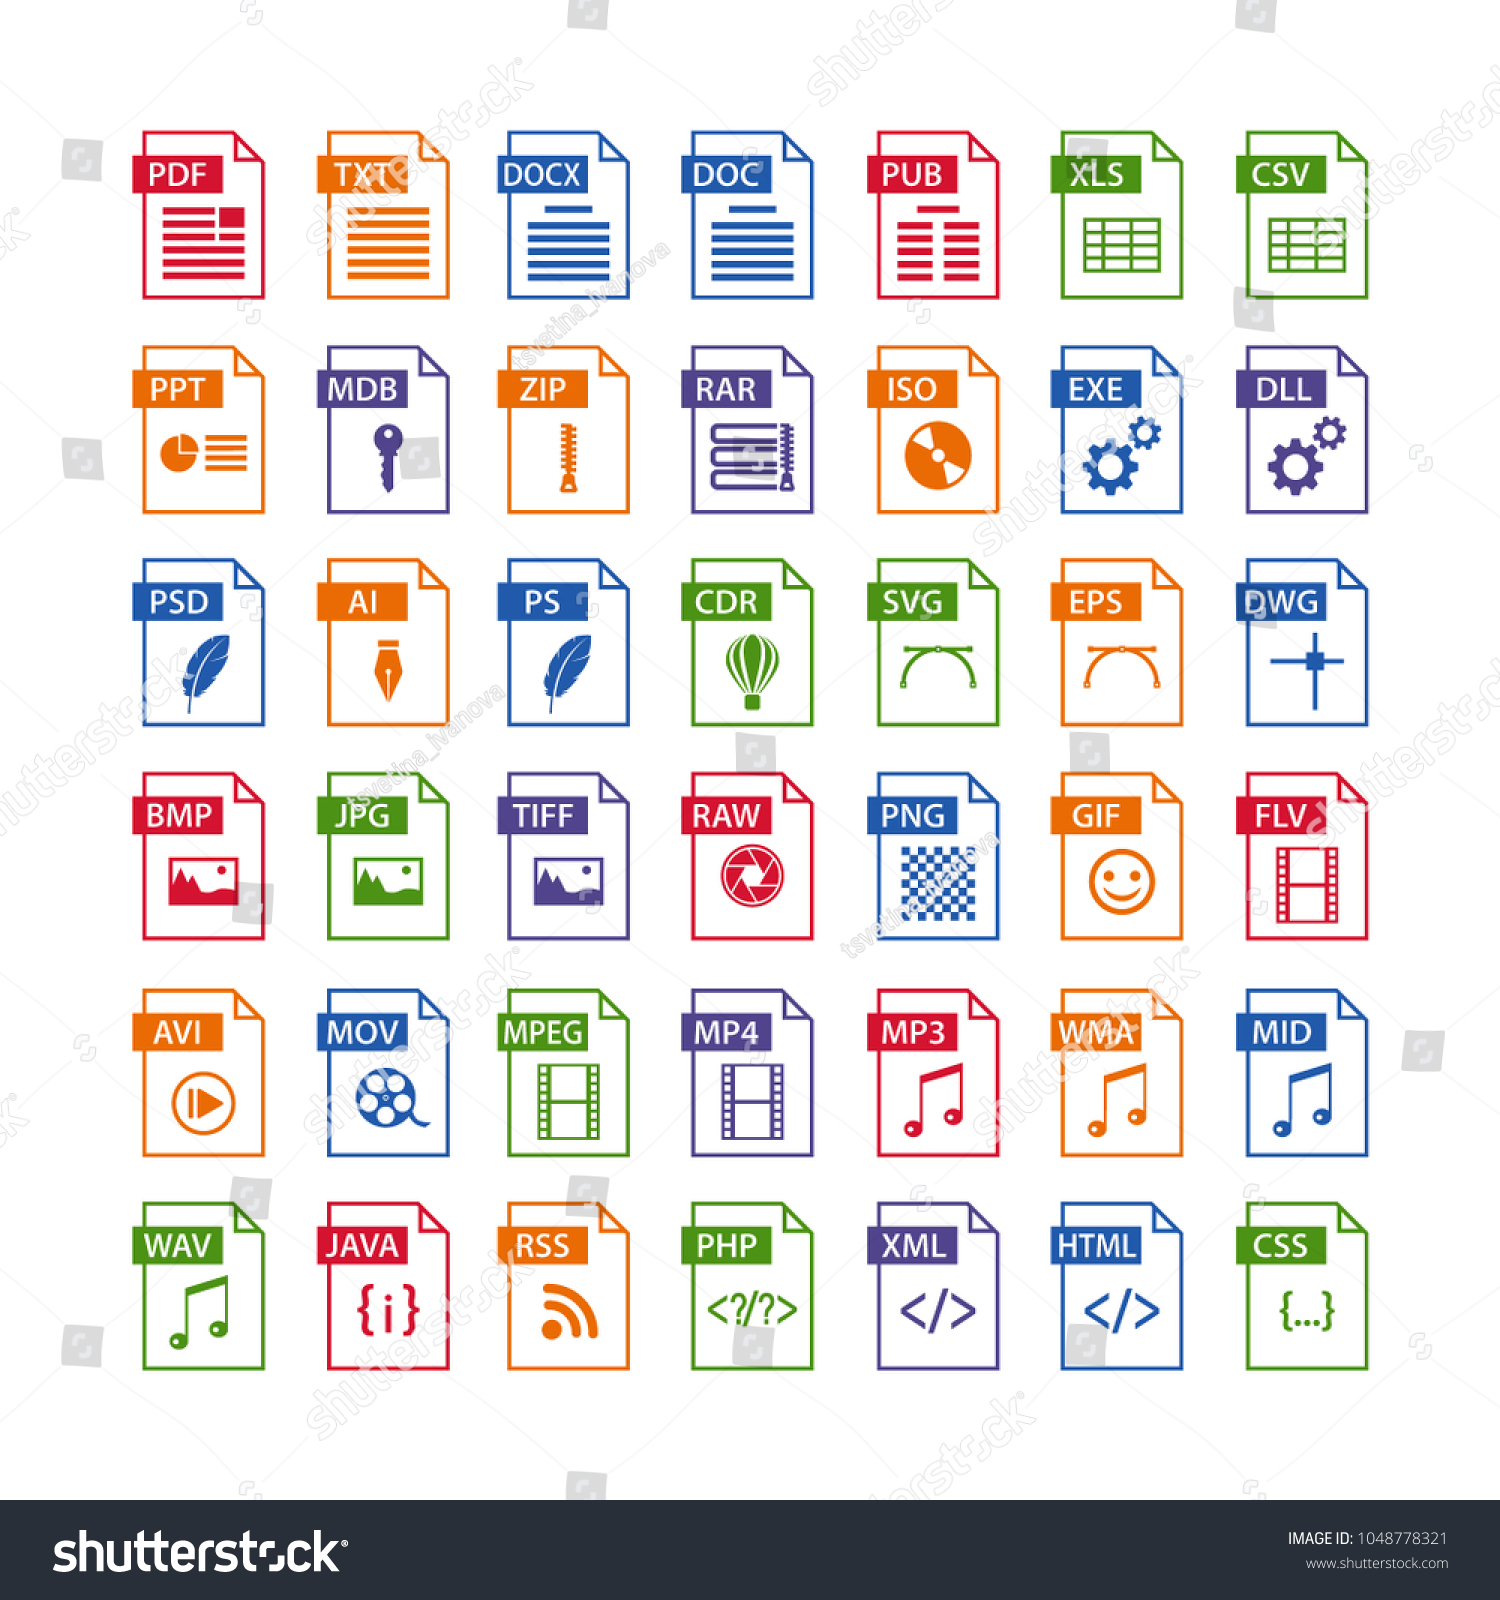 SVG of colorful set of file type icons. file format icon set in color, files symbols buttons, simple design svg